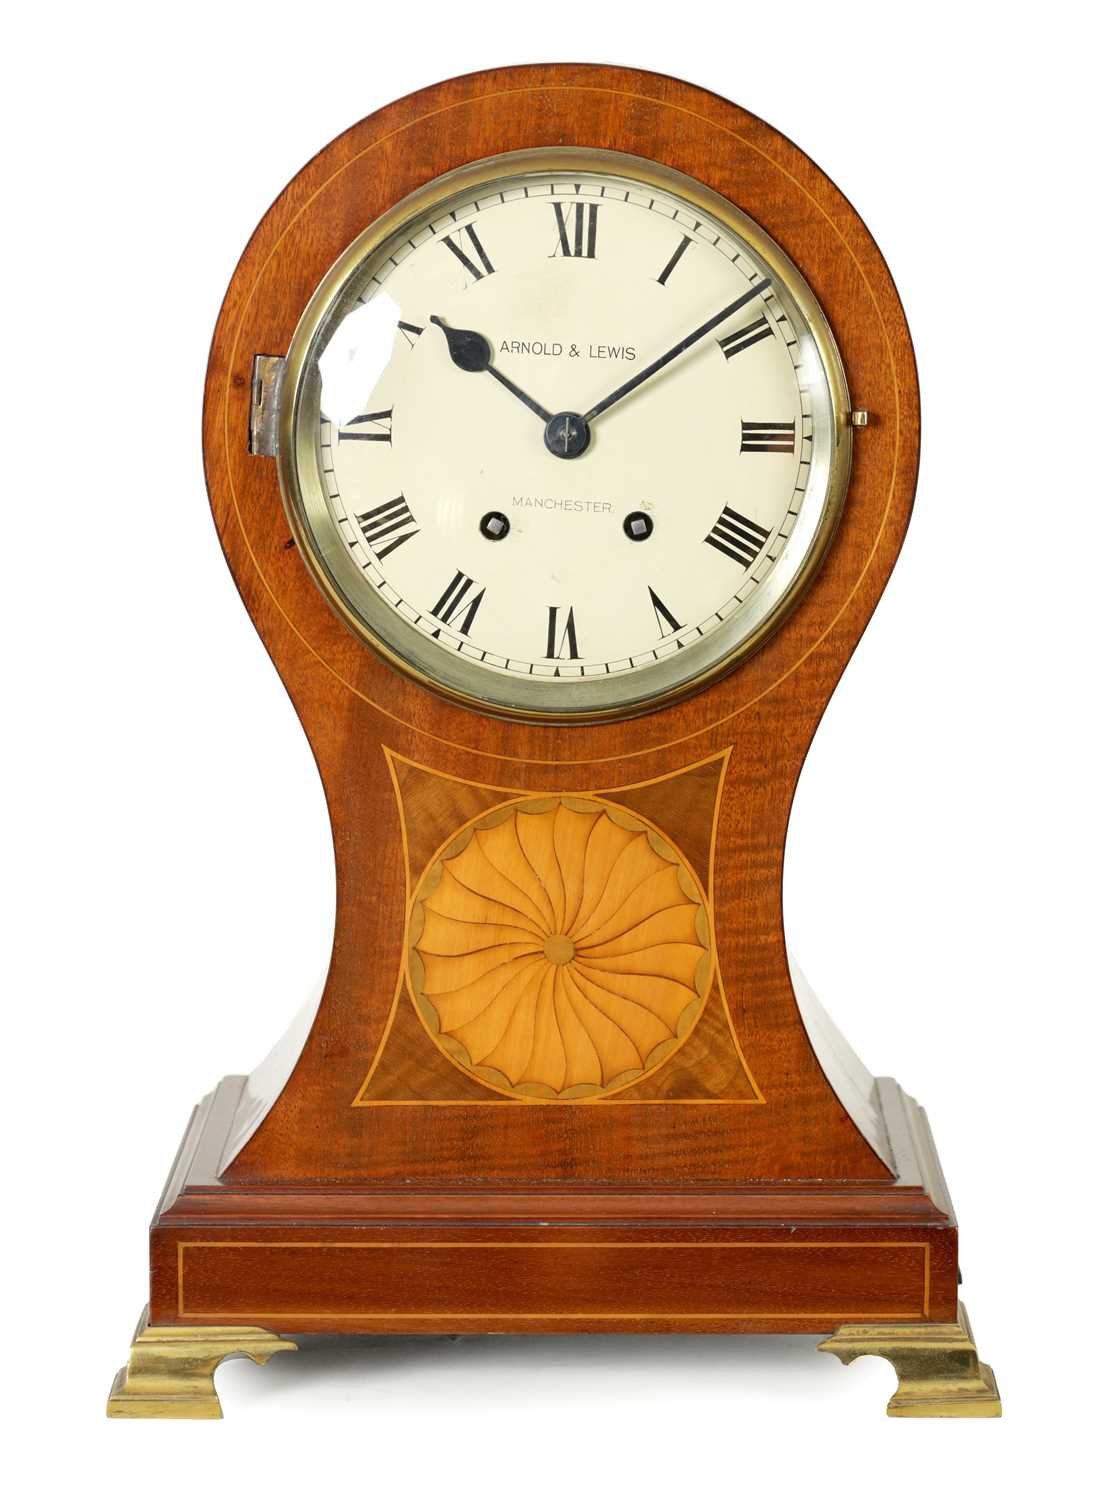 ARNOLD AND LEWIS, MANCHESTER. AN EDWARDIAN FRENCH INLAID MAHOGANY BRACKET CLOCK